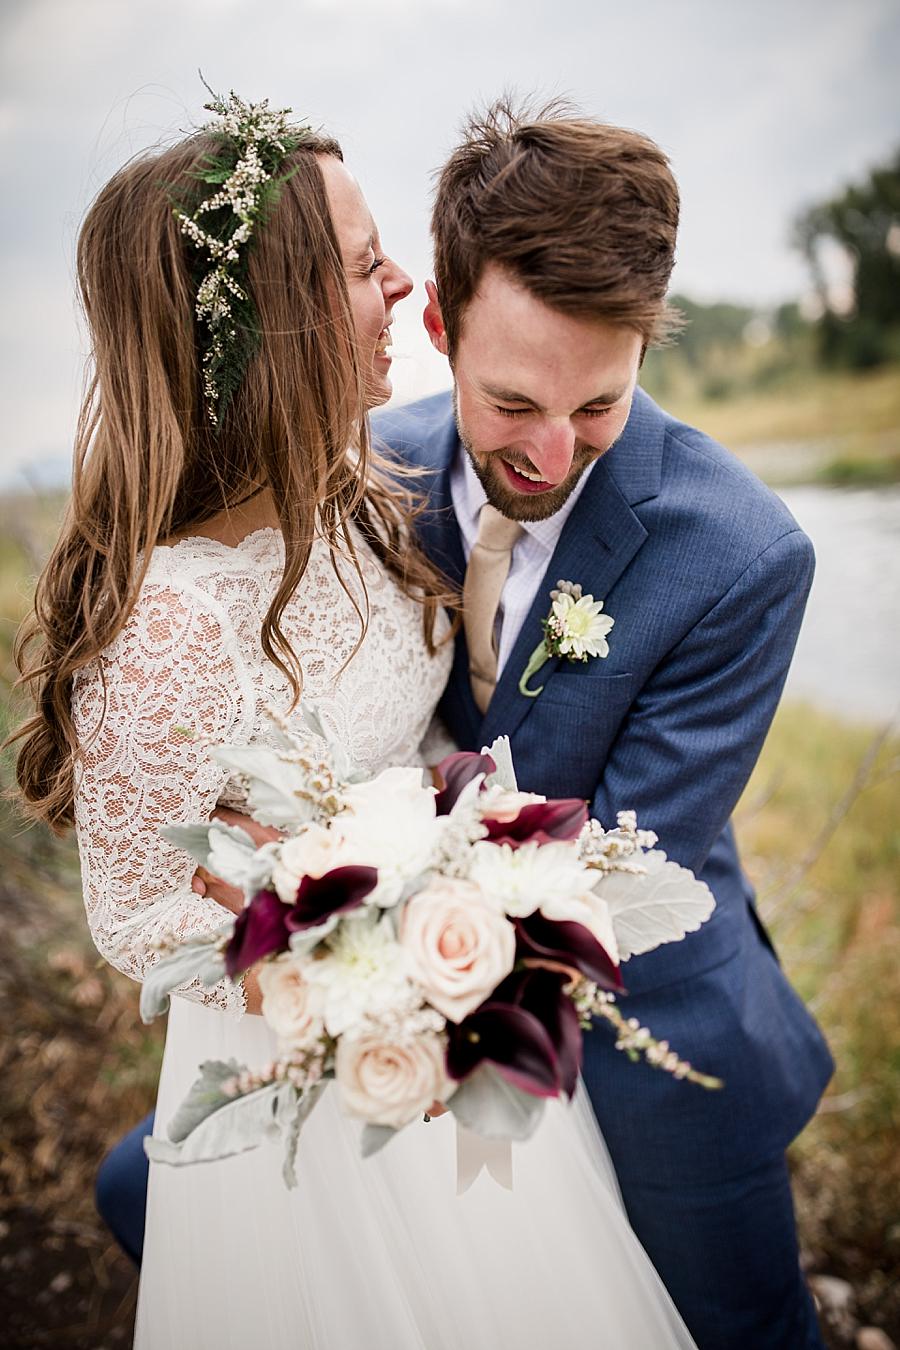 Laughing with each other at this Grand Tetons Destination Wedding by Knoxville Wedding Photographer, Amanda May Photos.